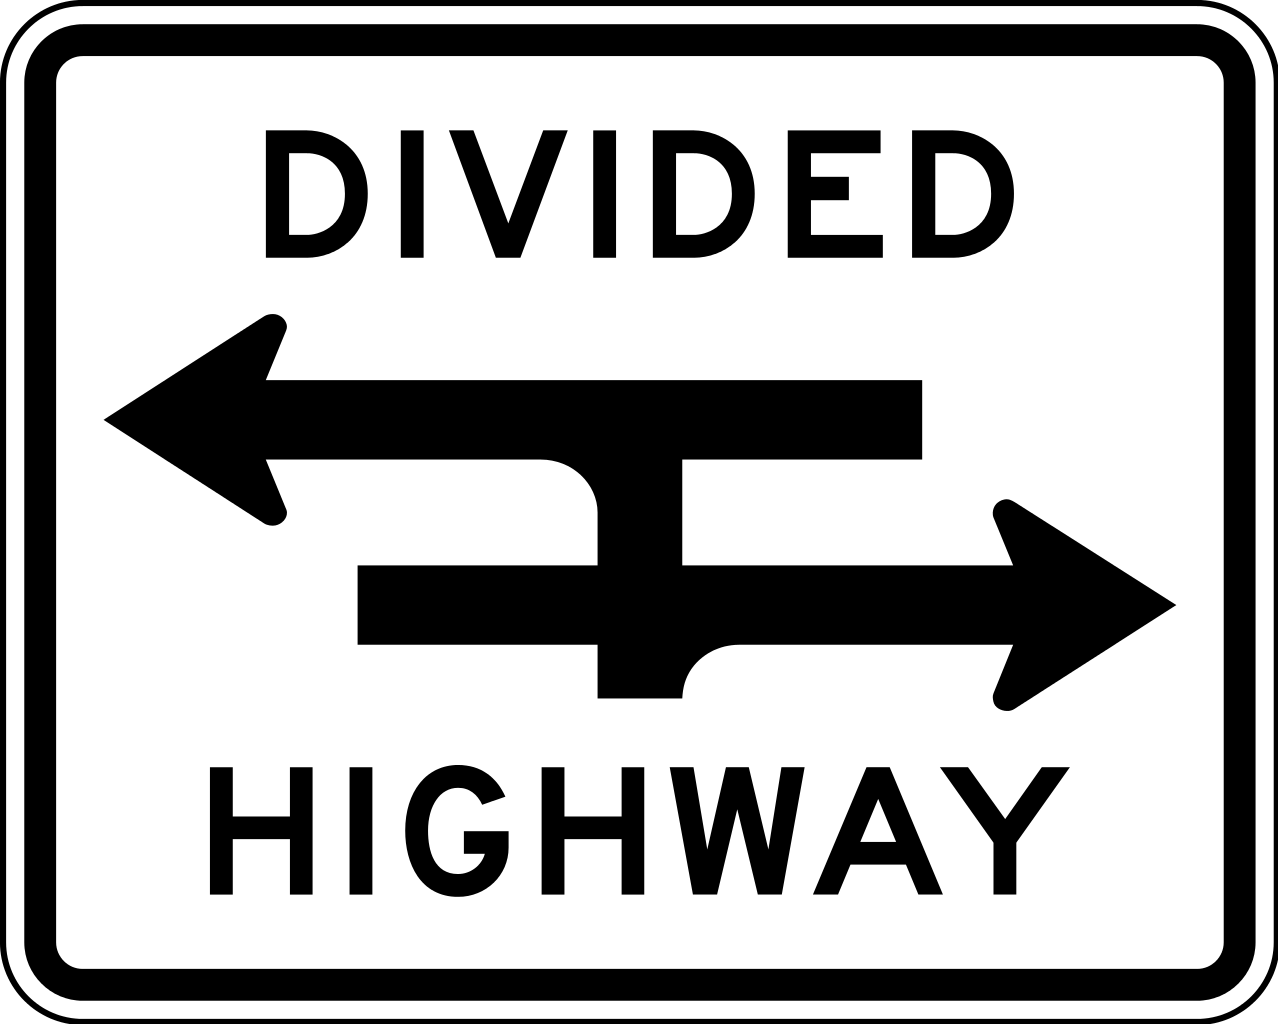 Divided Highway. Photo is in the Public Domain.